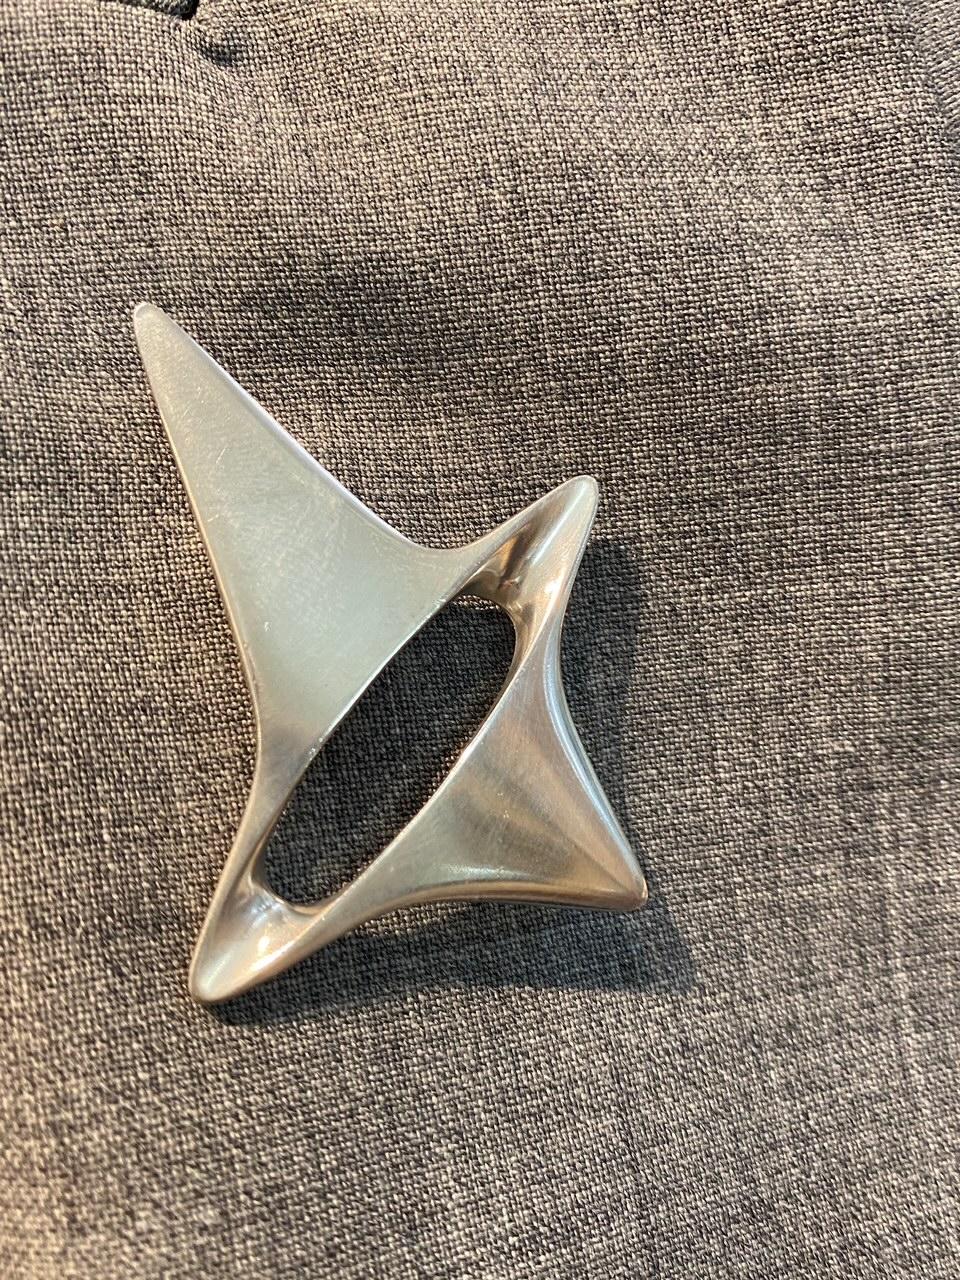 Georg Jensen Sterling Amorphic Brooch, Design #339 by Henning Koppel In Good Condition For Sale In Big Bend, WI